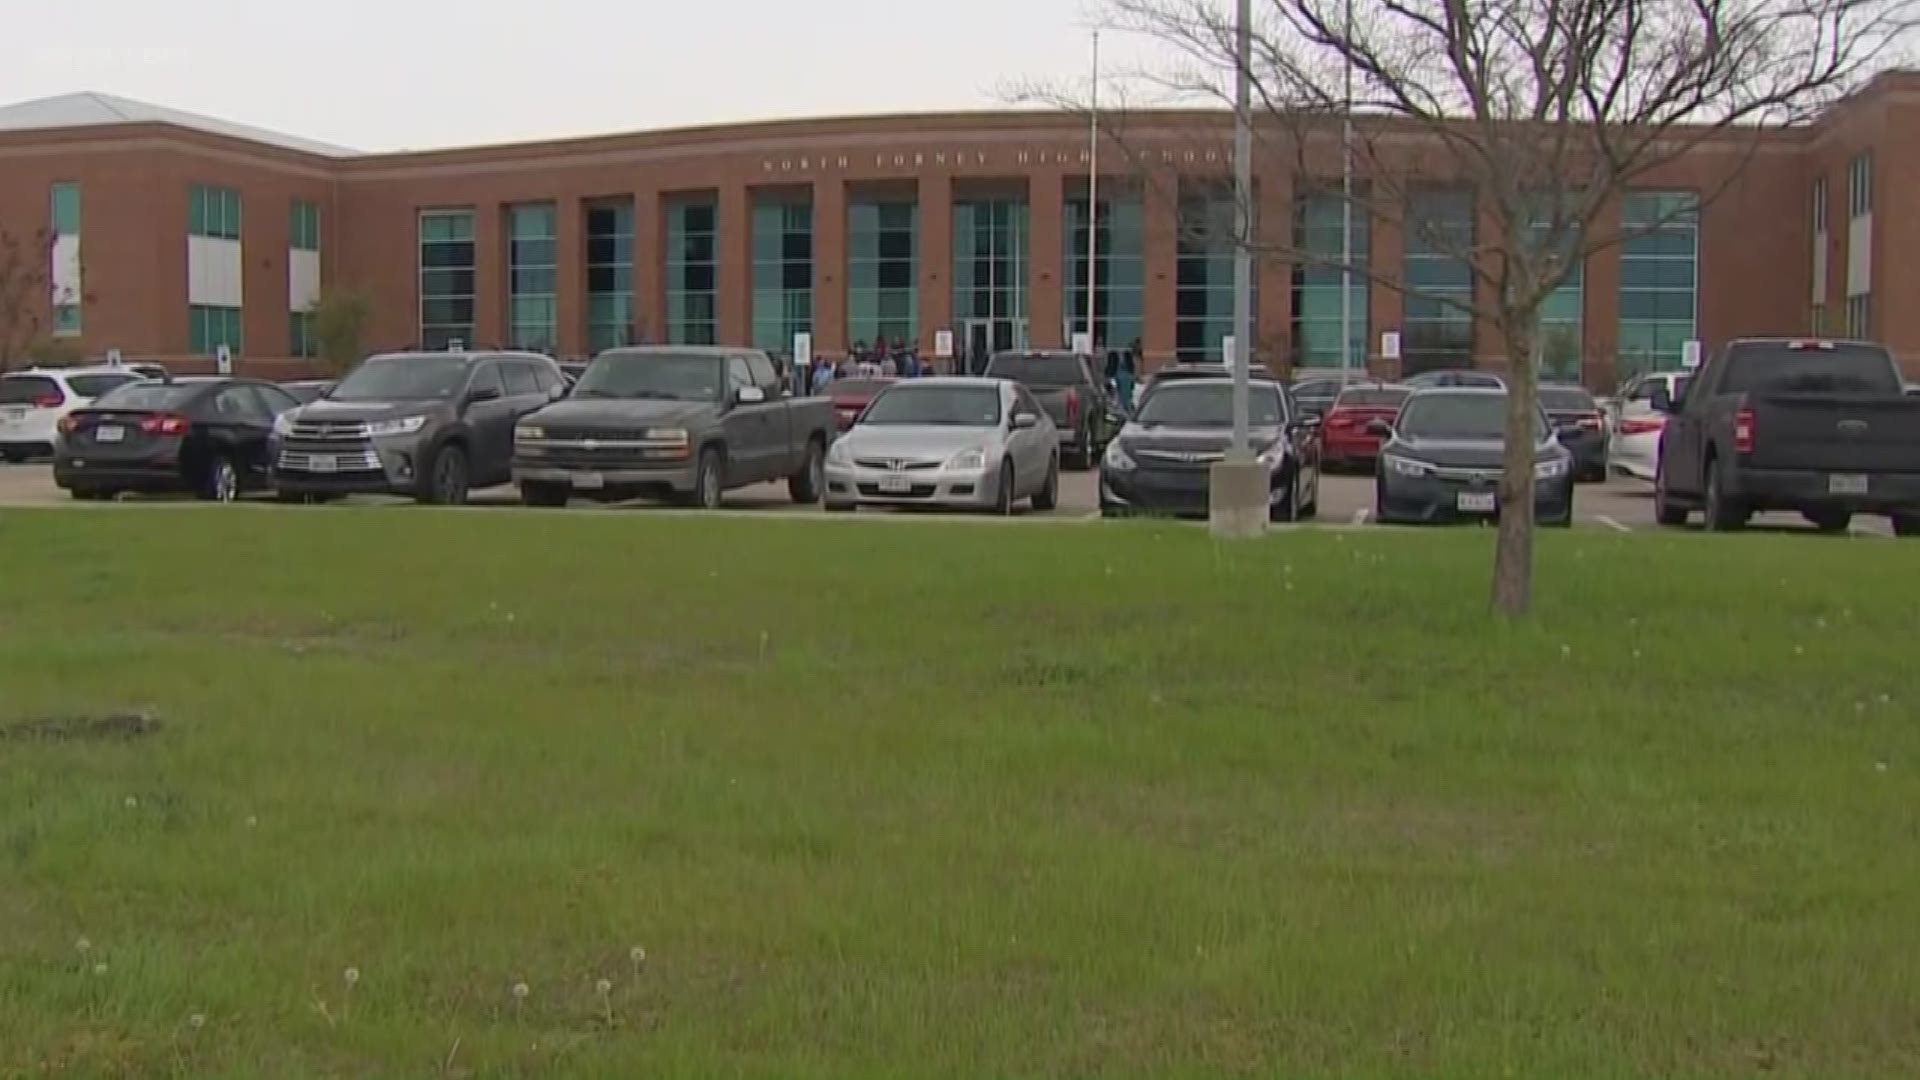 The school was placed on lockdown after a student was found in possession of a firearm Monday.